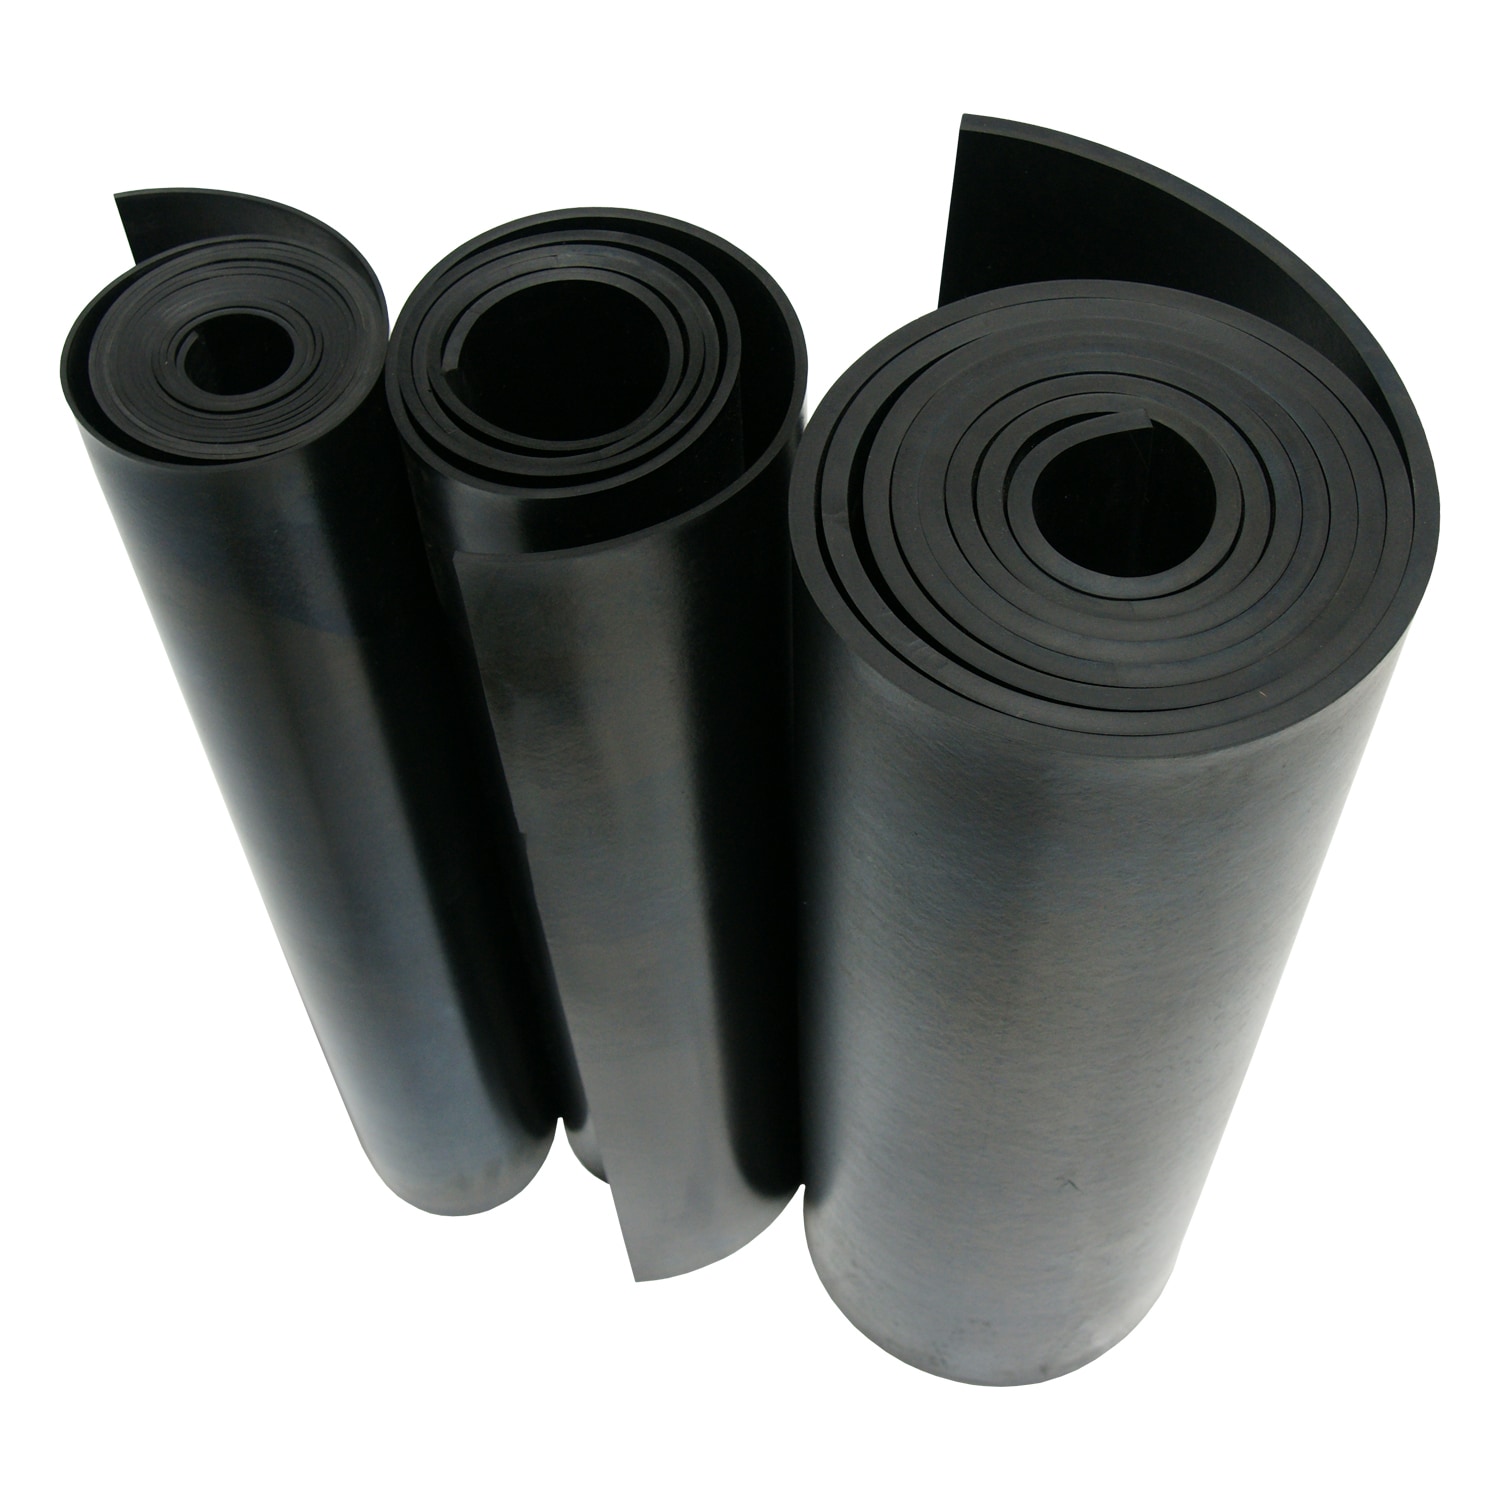 Black Heat Resistant Silicone Rubber Roll Strips Sheeting High Temp 60A, No  Adhesive,DIY Gaskets Material, Suitable for Seals, Supports, Pads